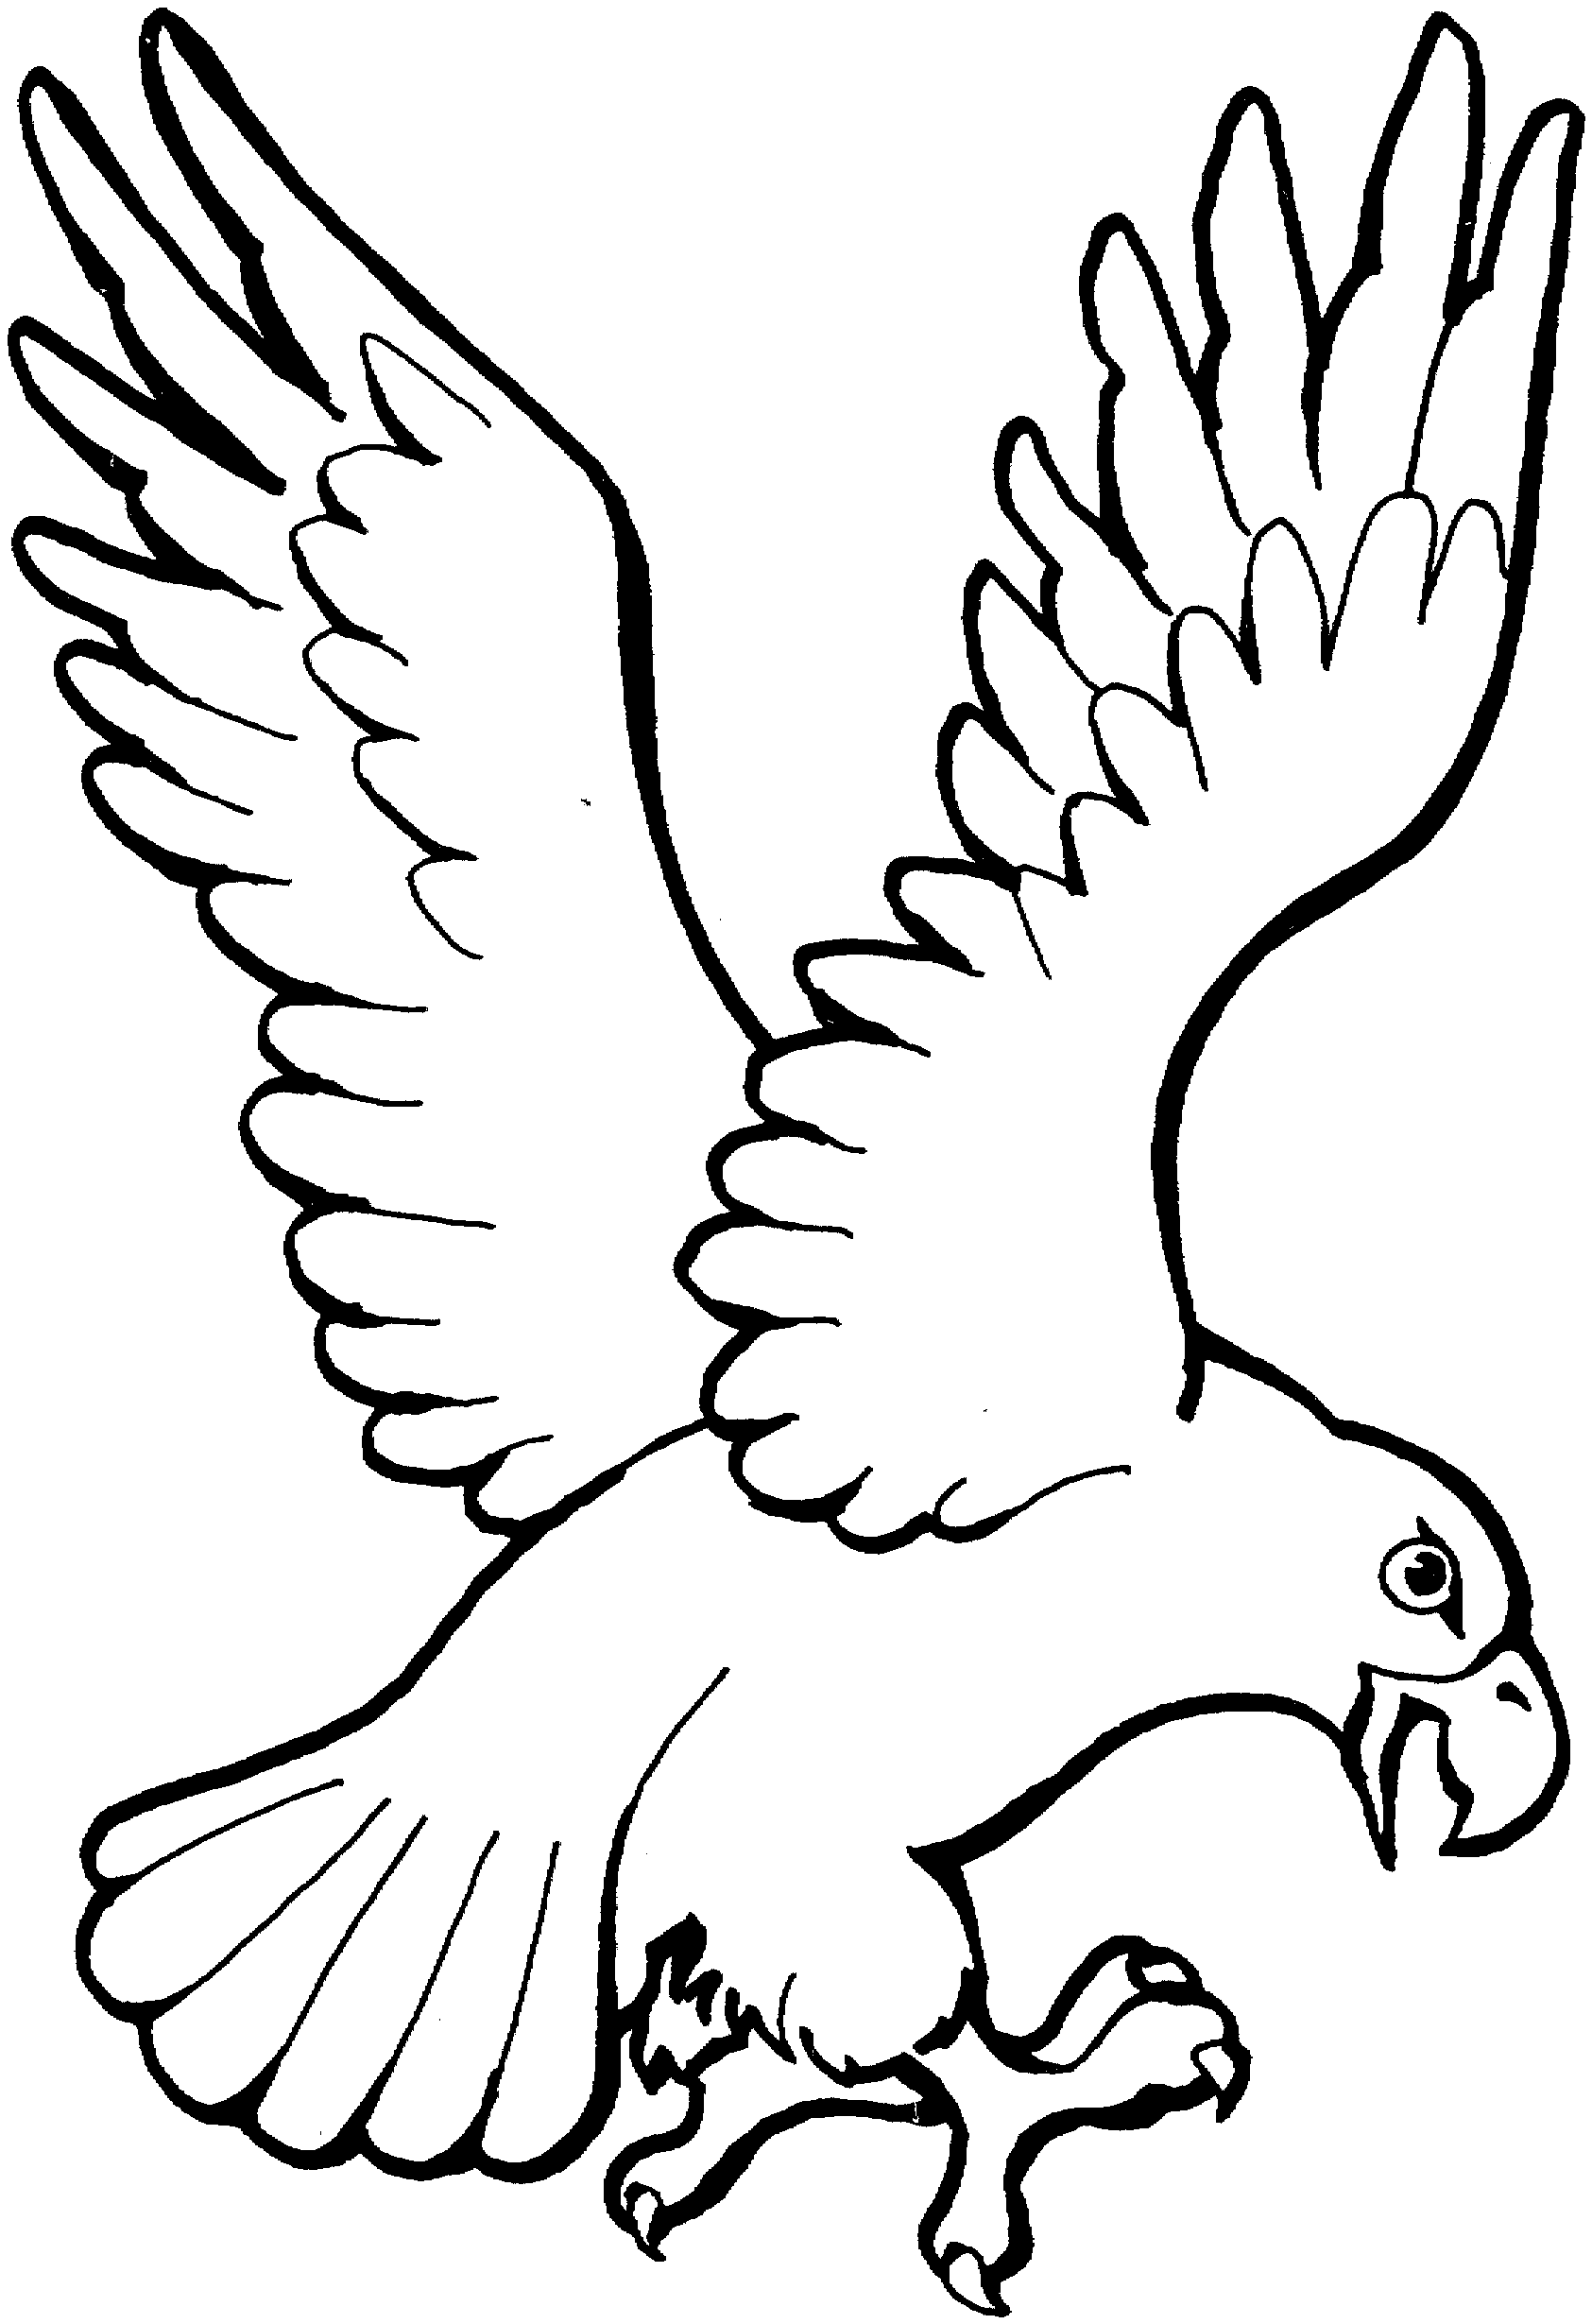 Eagle landing coloring page | Bird coloring pages, Eagle coloring pages